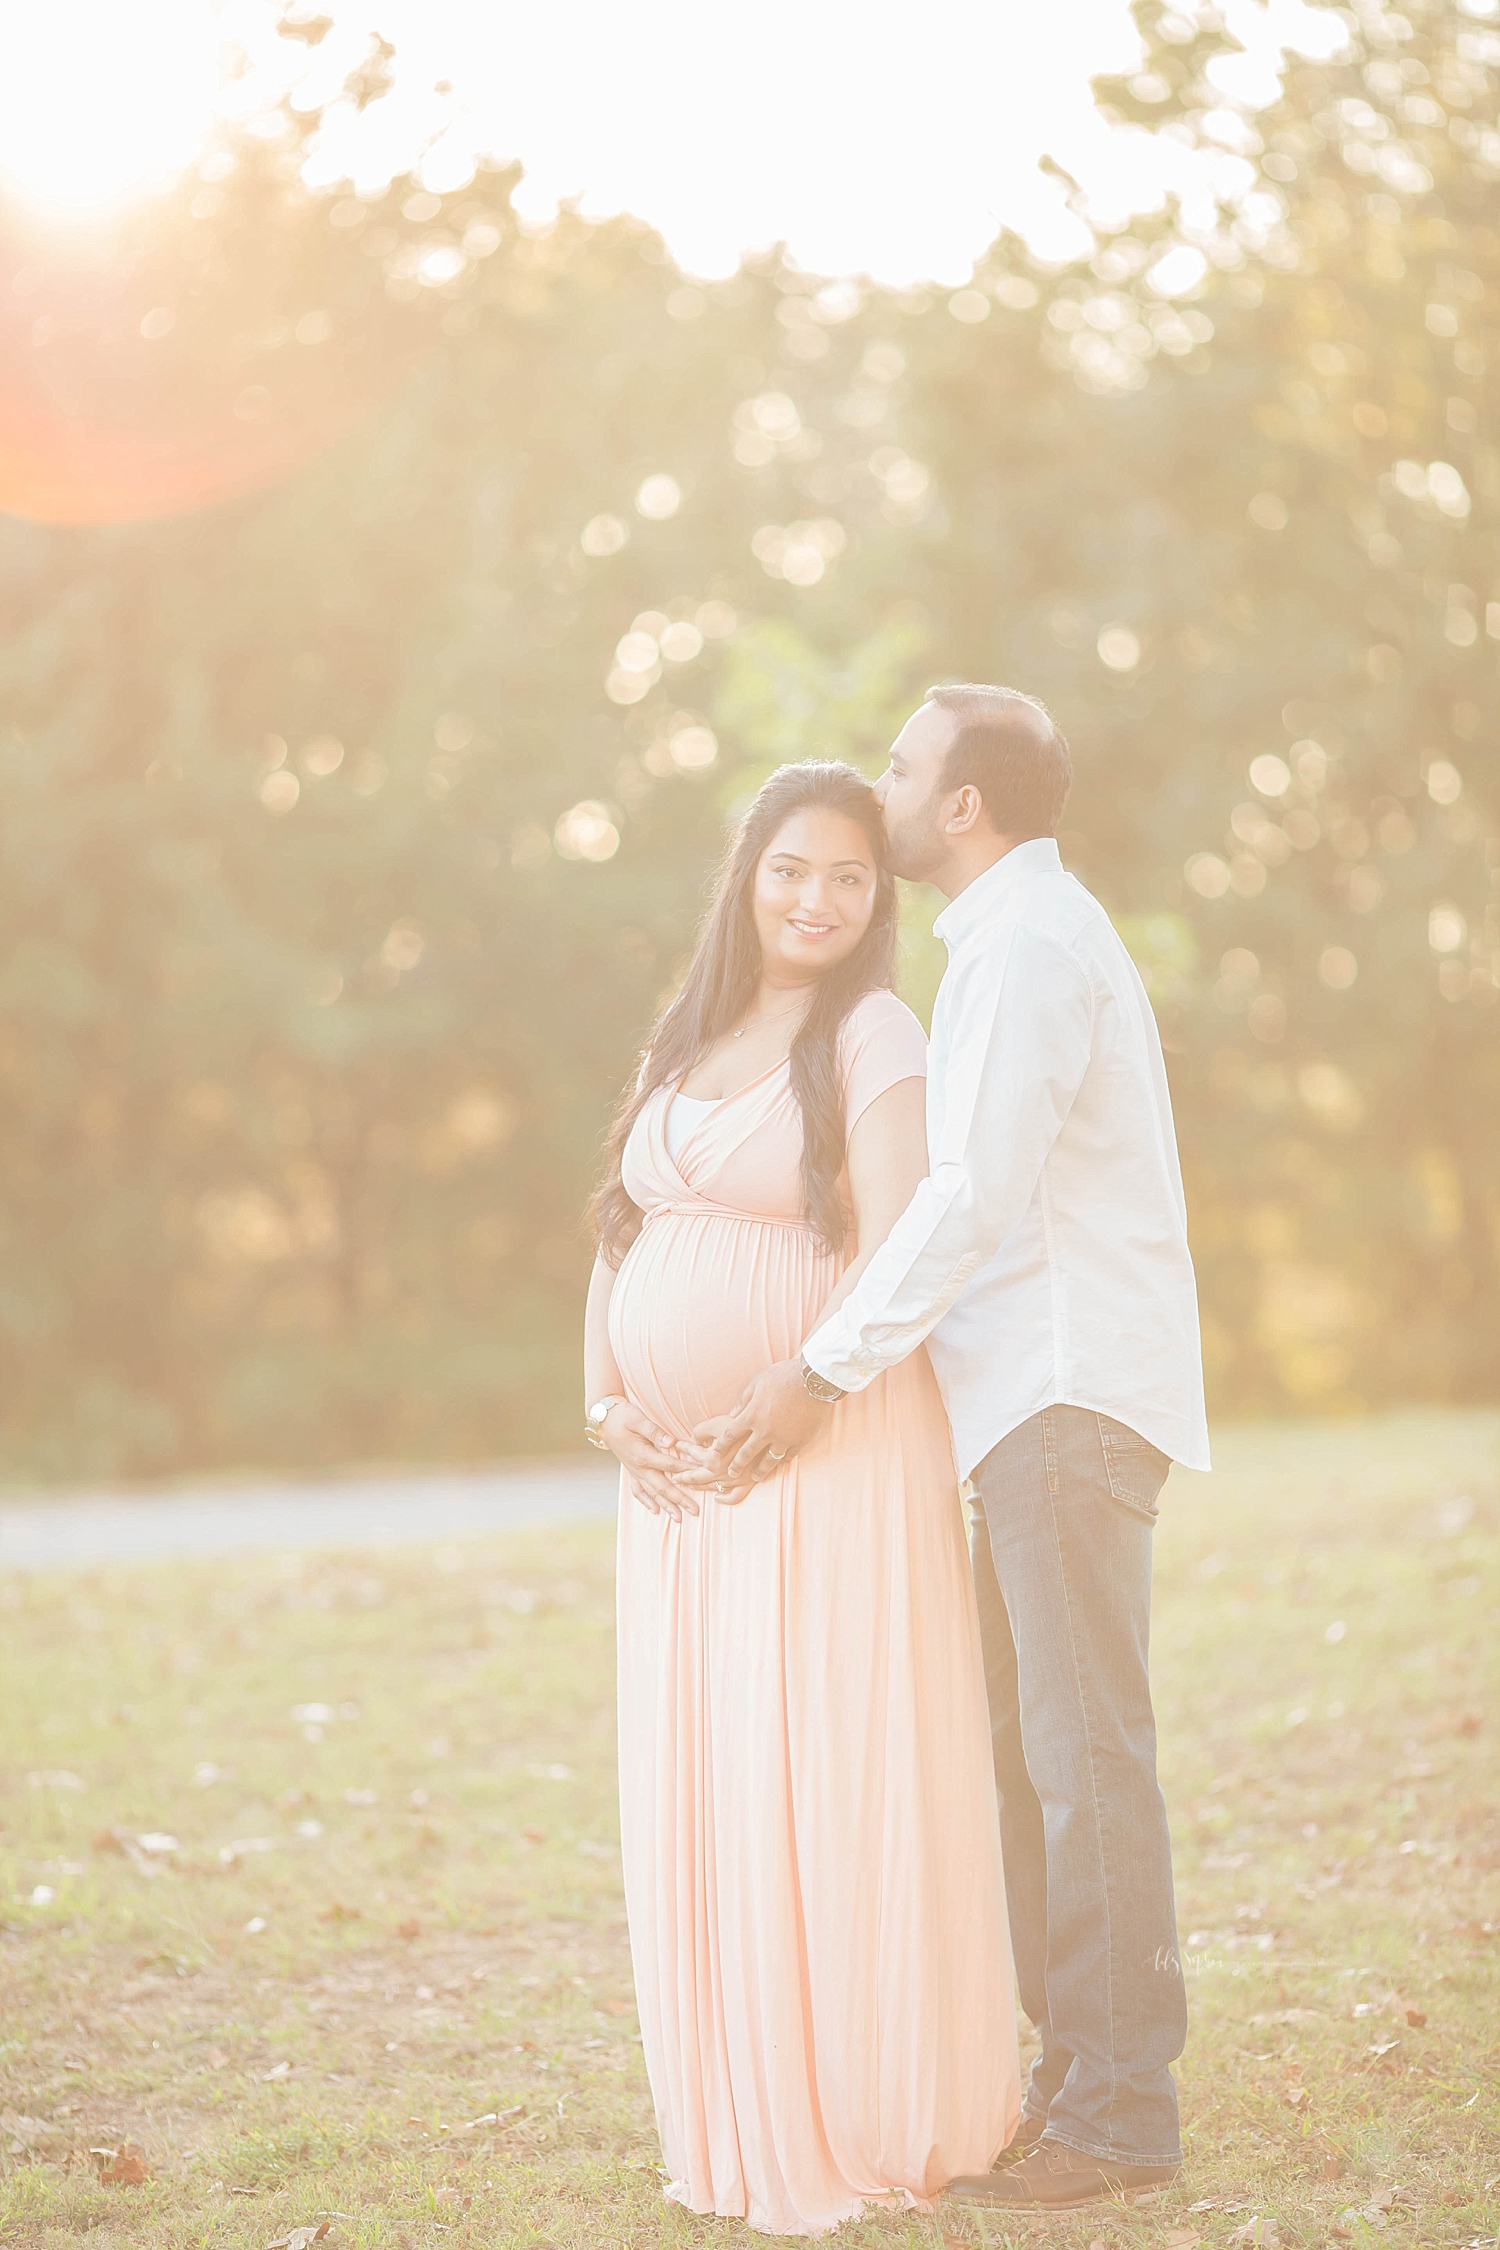 Image of a pregnant, Indian, woman and her husband, standing in a park at sunset, while he kisses her head, while she smiles. 